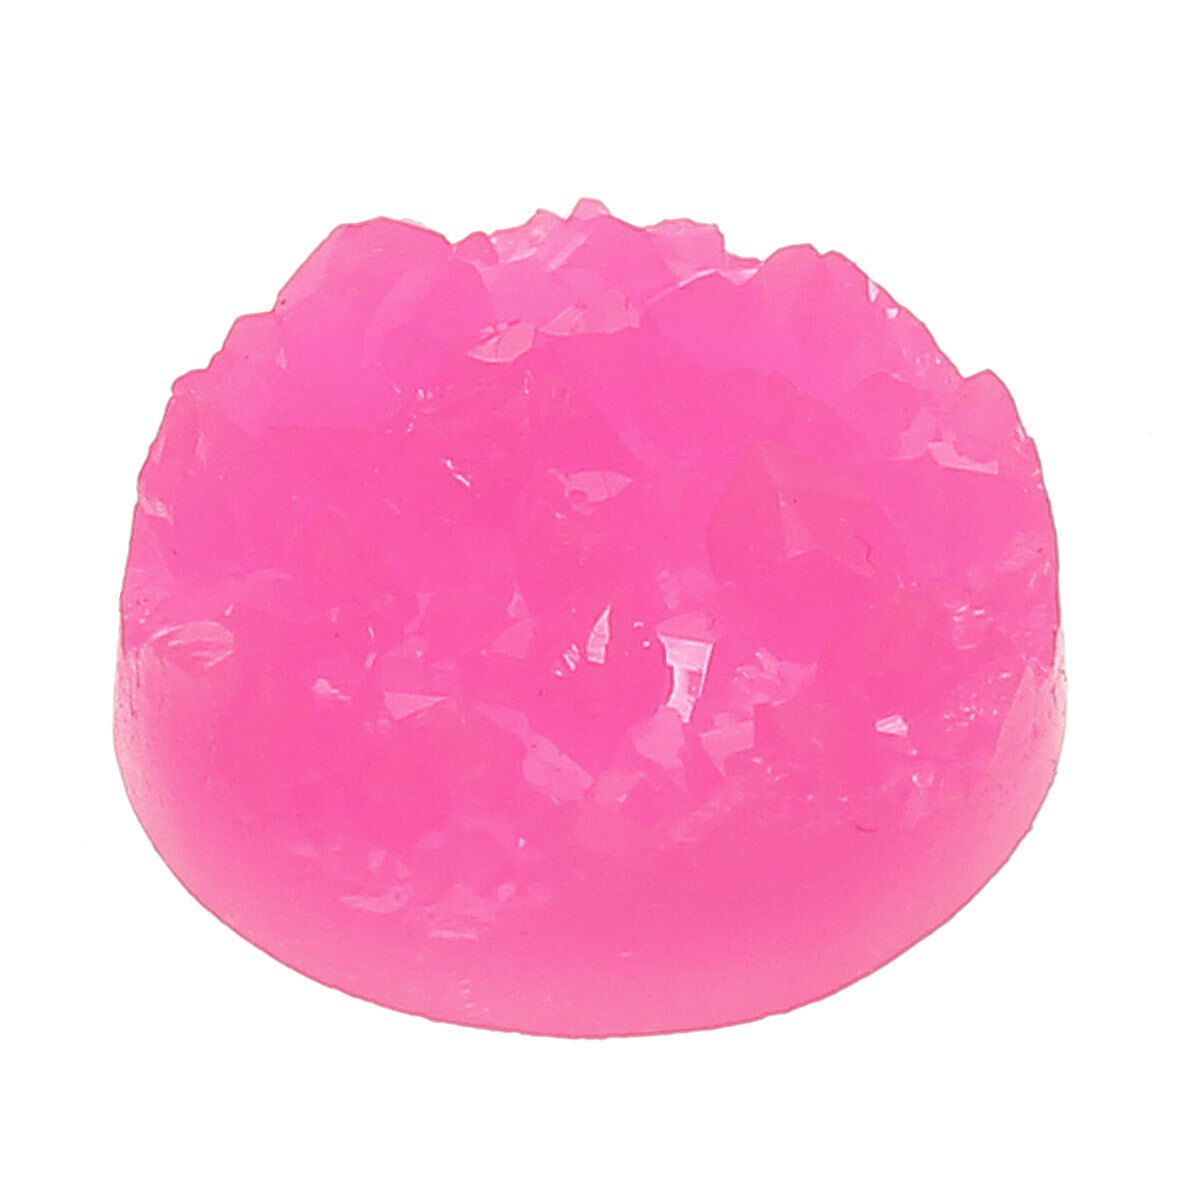 10 Round Resin Hot Pink Druzy Cabochons, 12mm  Cab0301